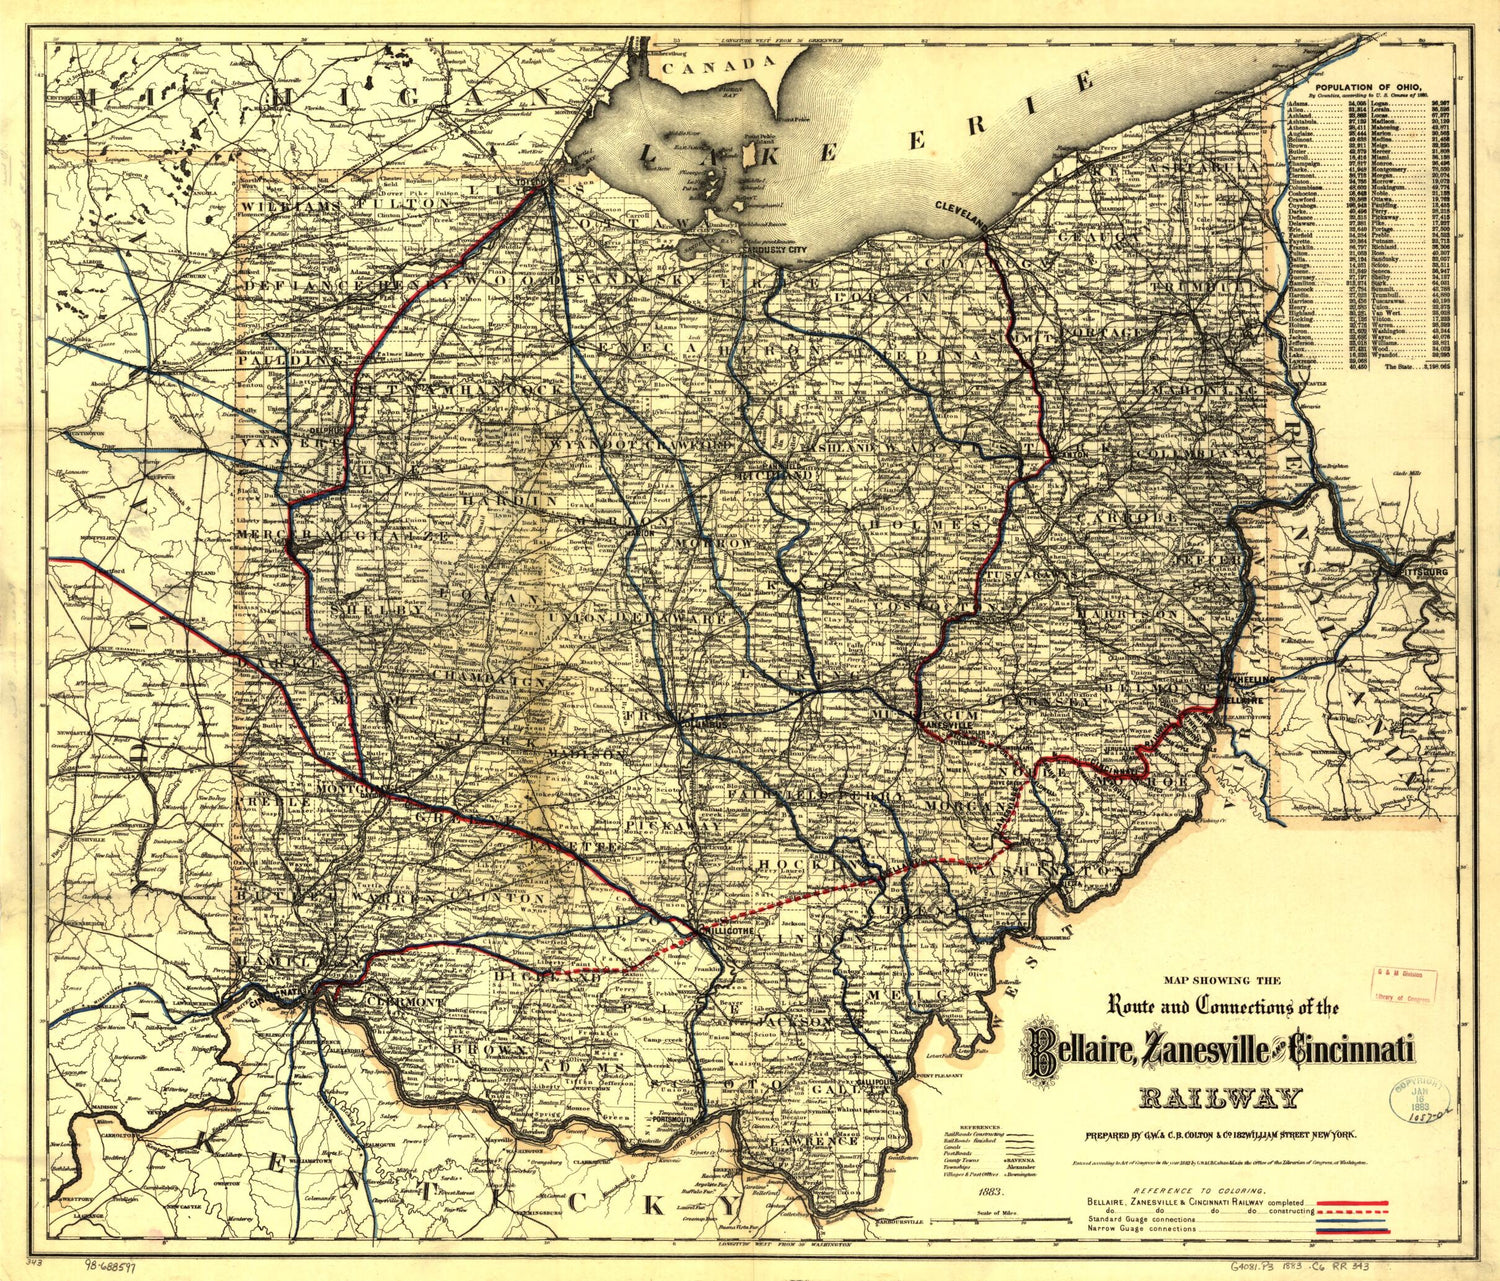 This old map of Map Showing the Route and Connections of the Bellaire, Zanesville and Cincinnati Railway from 1883 was created by Zanesville and Cincinnati Railway Bellaire,  G.W. &amp; C.B. Colton &amp; Co in 1883